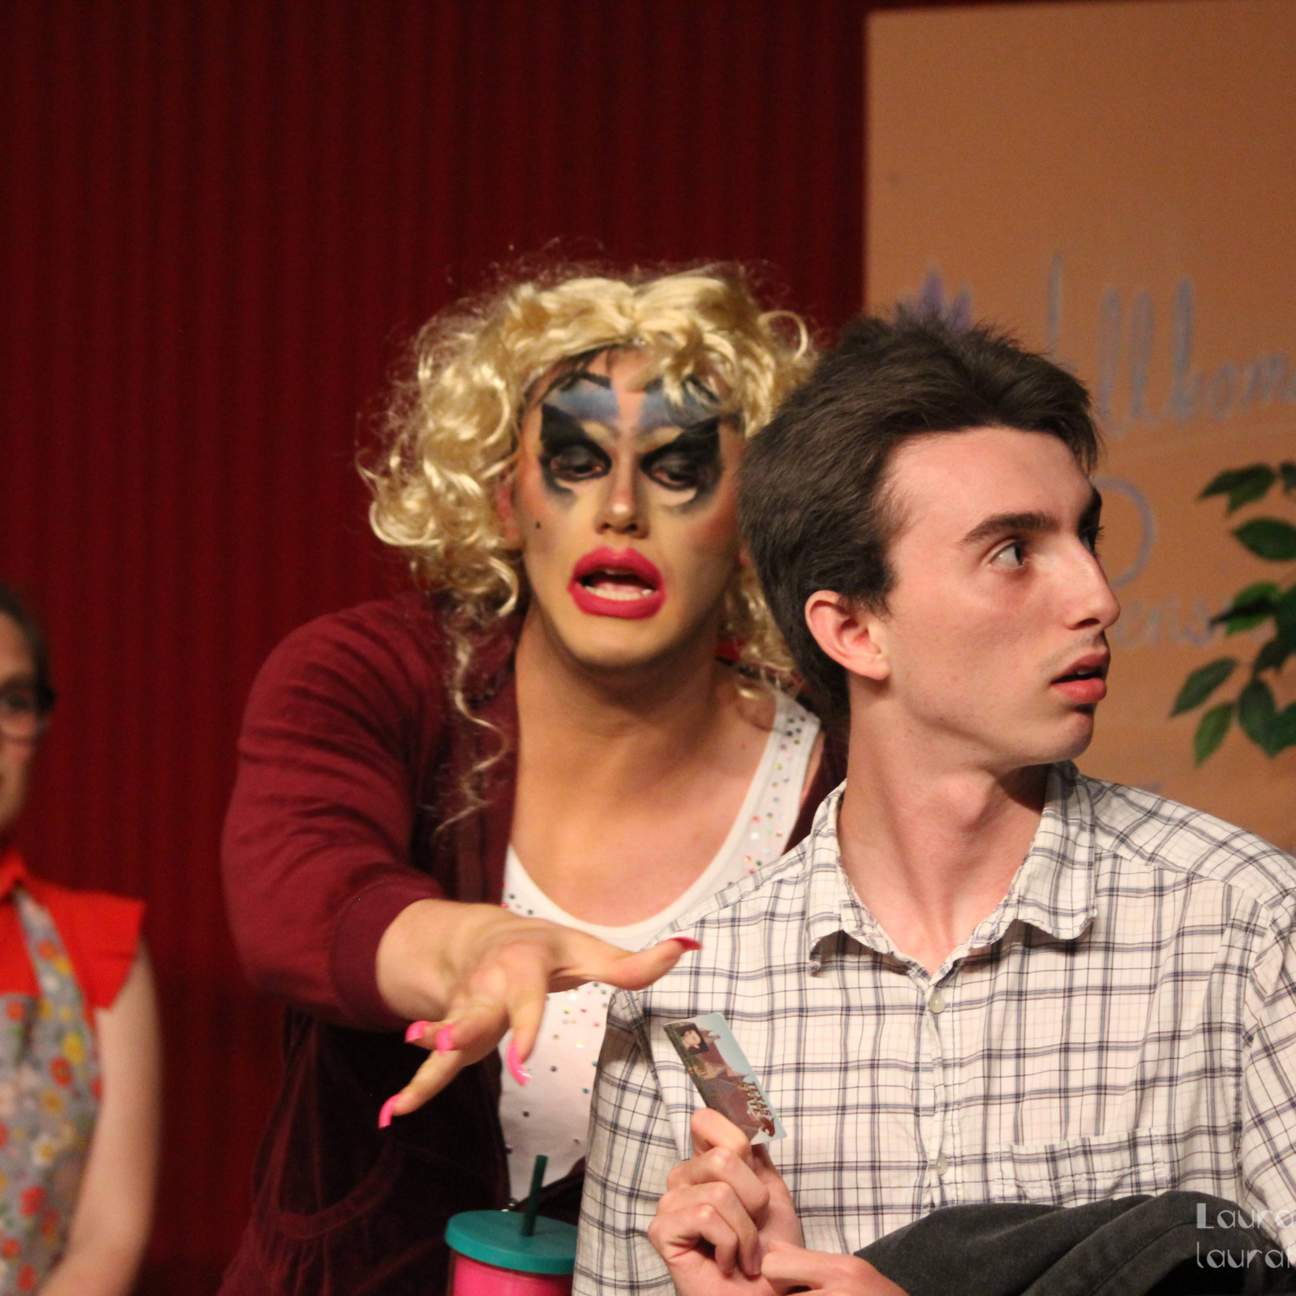 A man in drag reaches from behind another man, while a woman in an apron is in the background